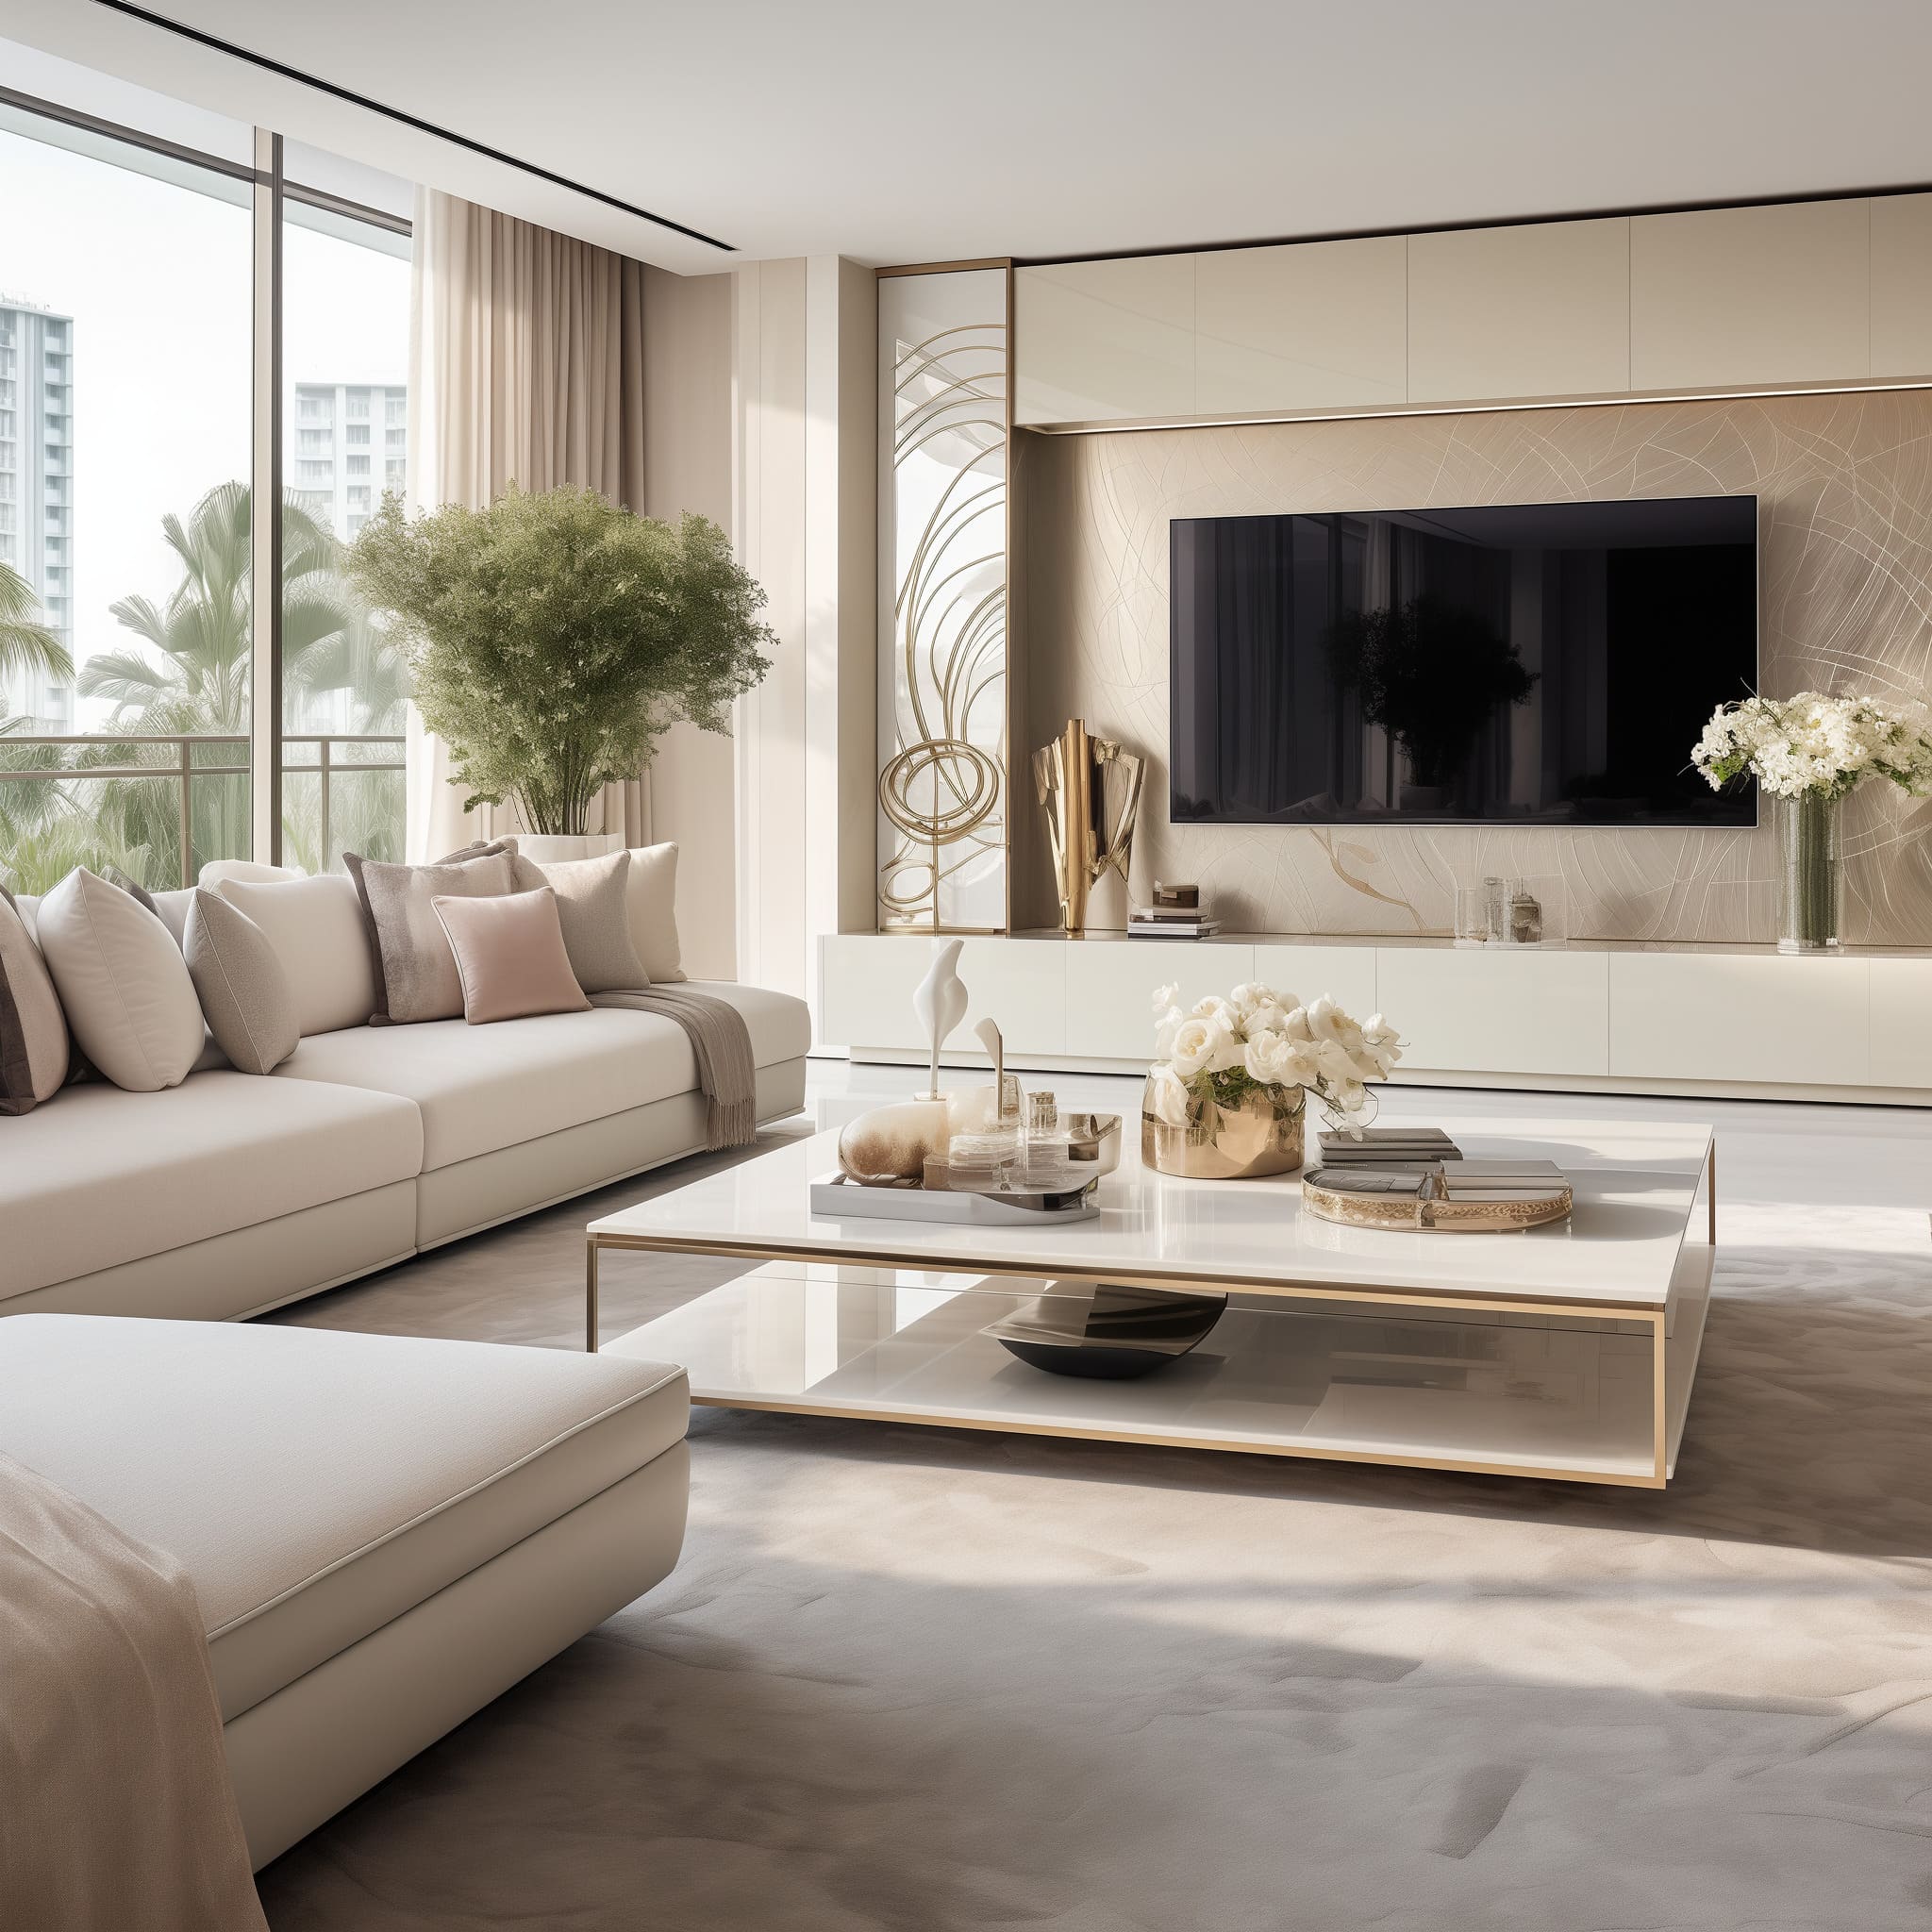 In this living room, the interior design harmoniously blends cream tones with luxury accents for an inviting space.